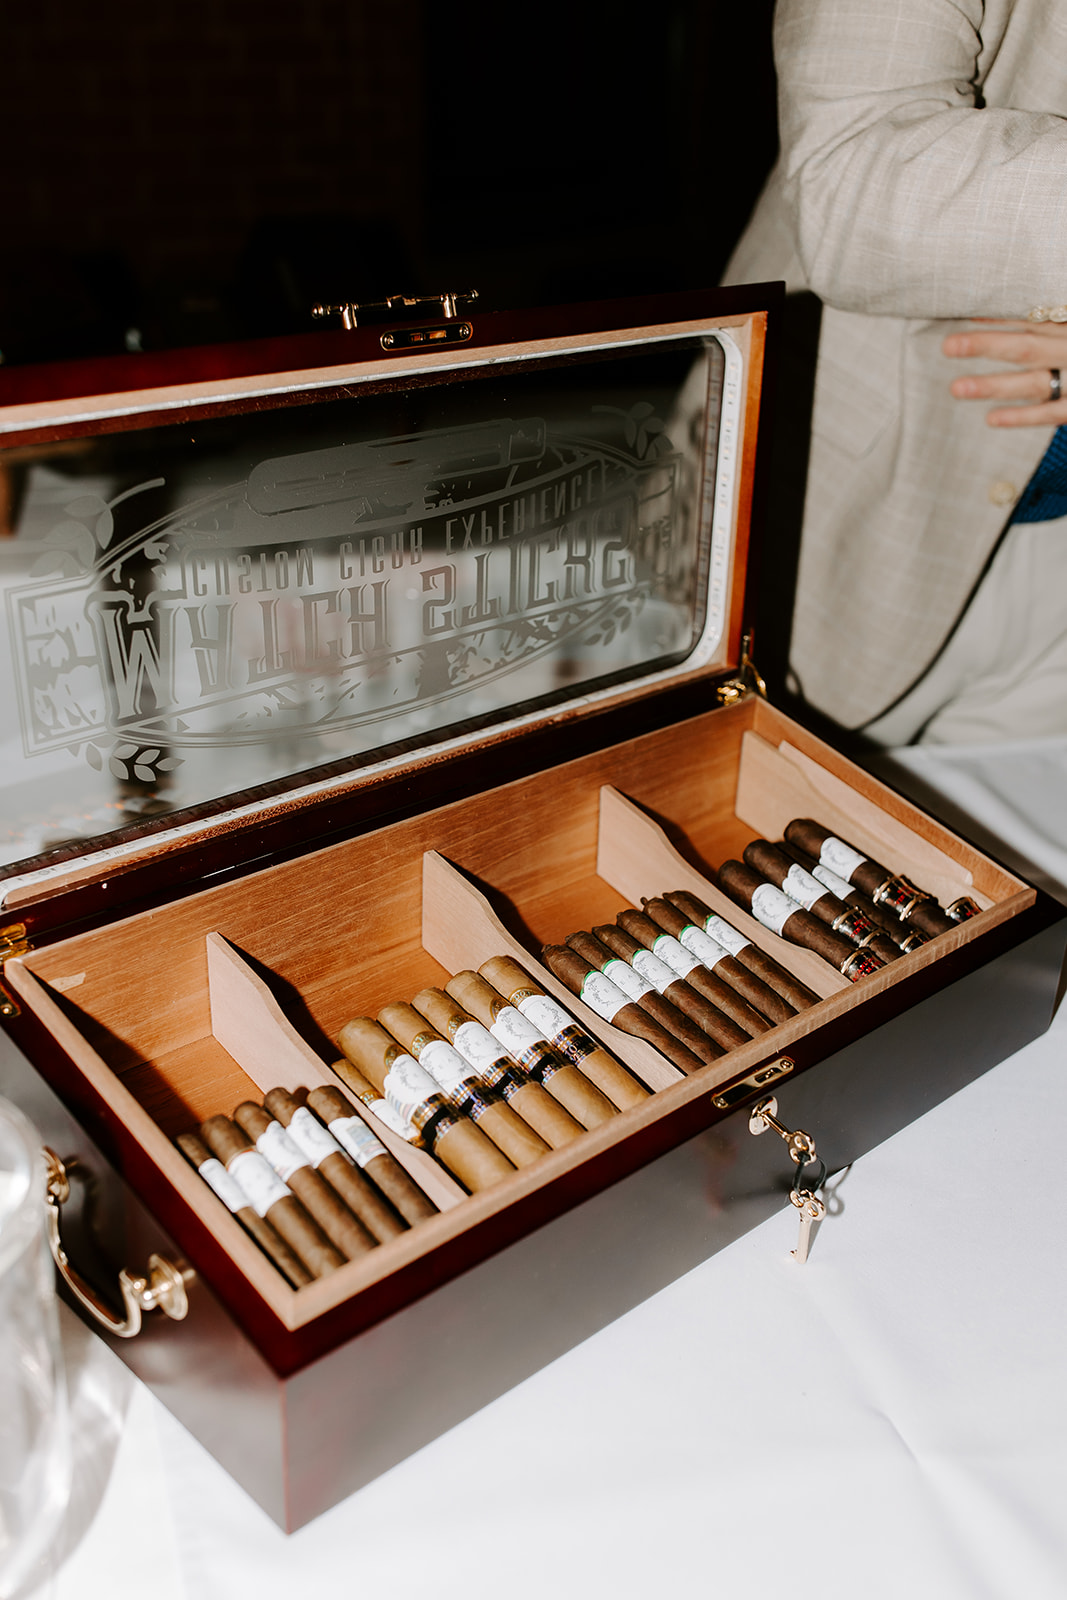 hand picked cigars for the wedding reception